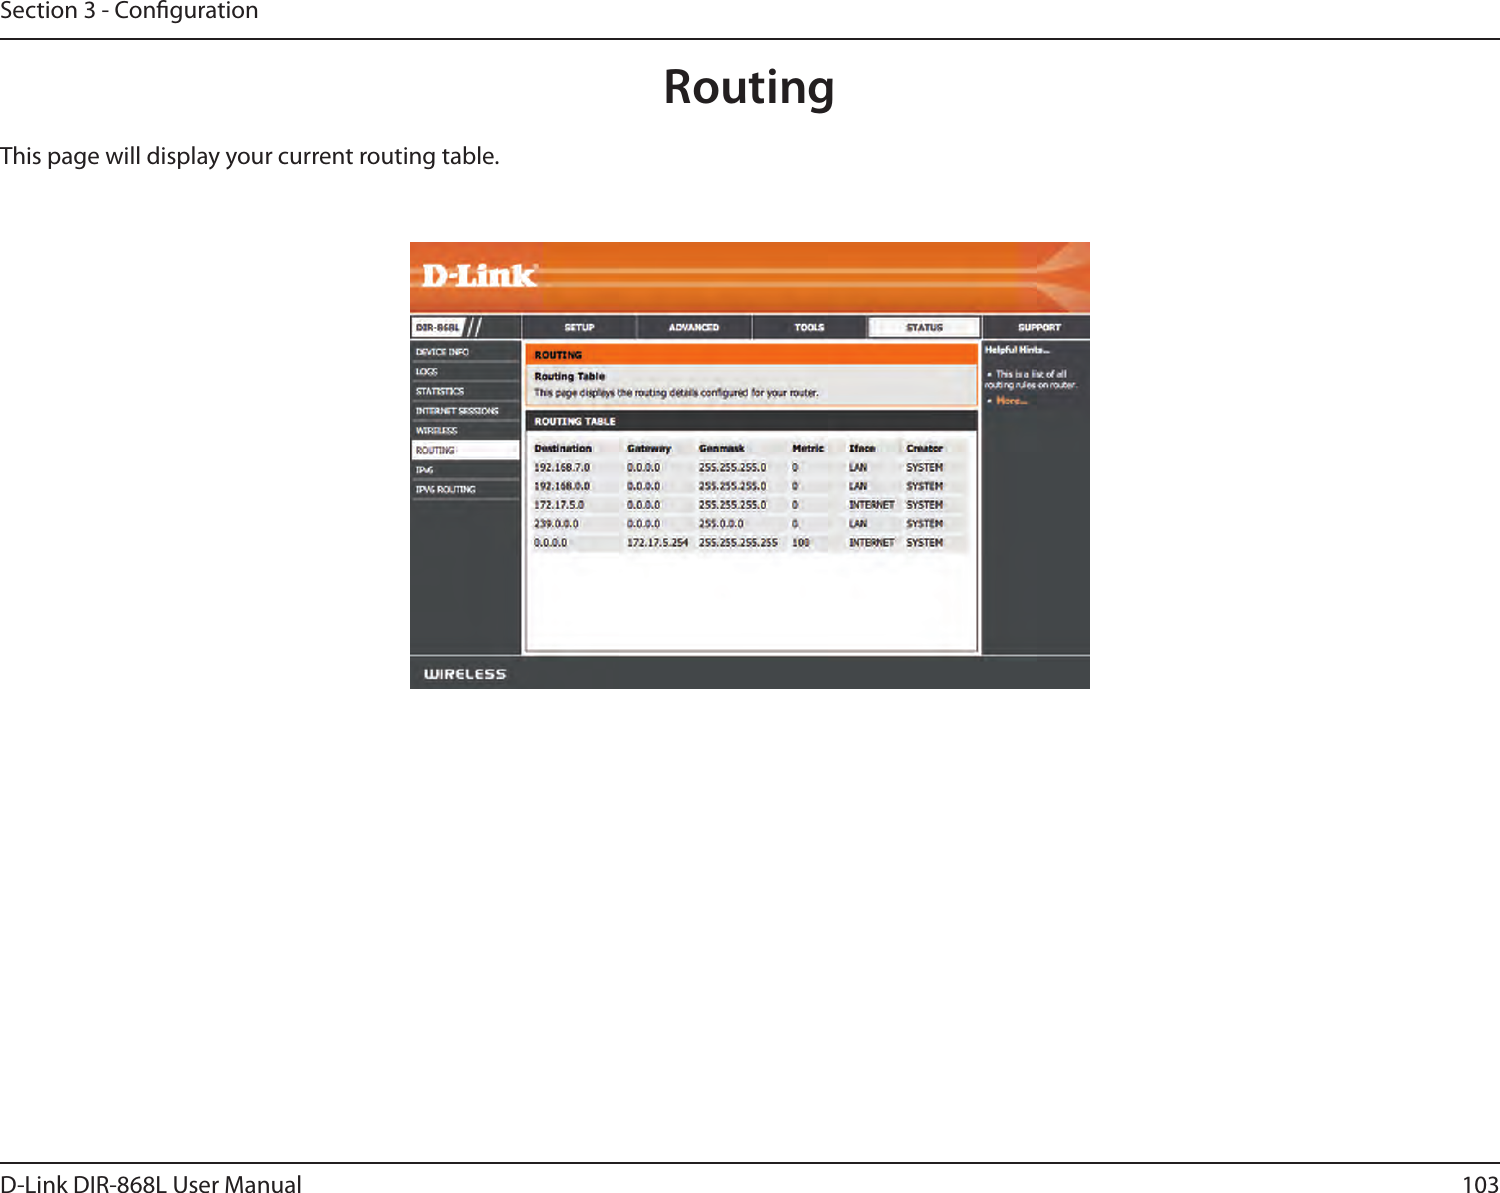 103D-Link DIR-868L User ManualSection 3 - CongurationRoutingThis page will display your current routing table.